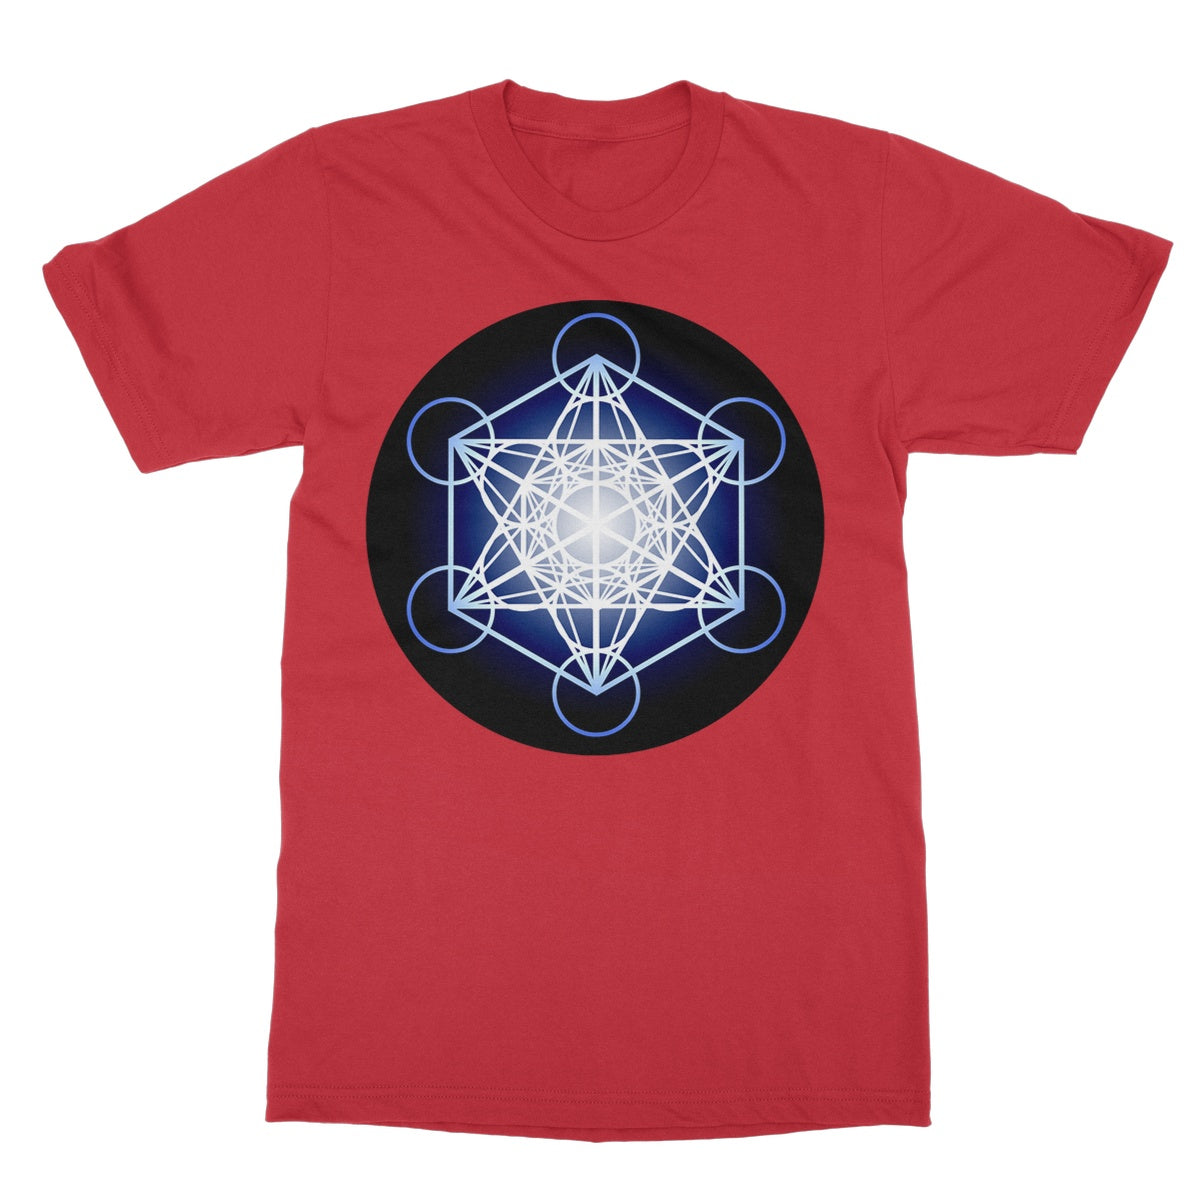 Metatron's Cube in Blue T-Shirt - Nature of Flowers